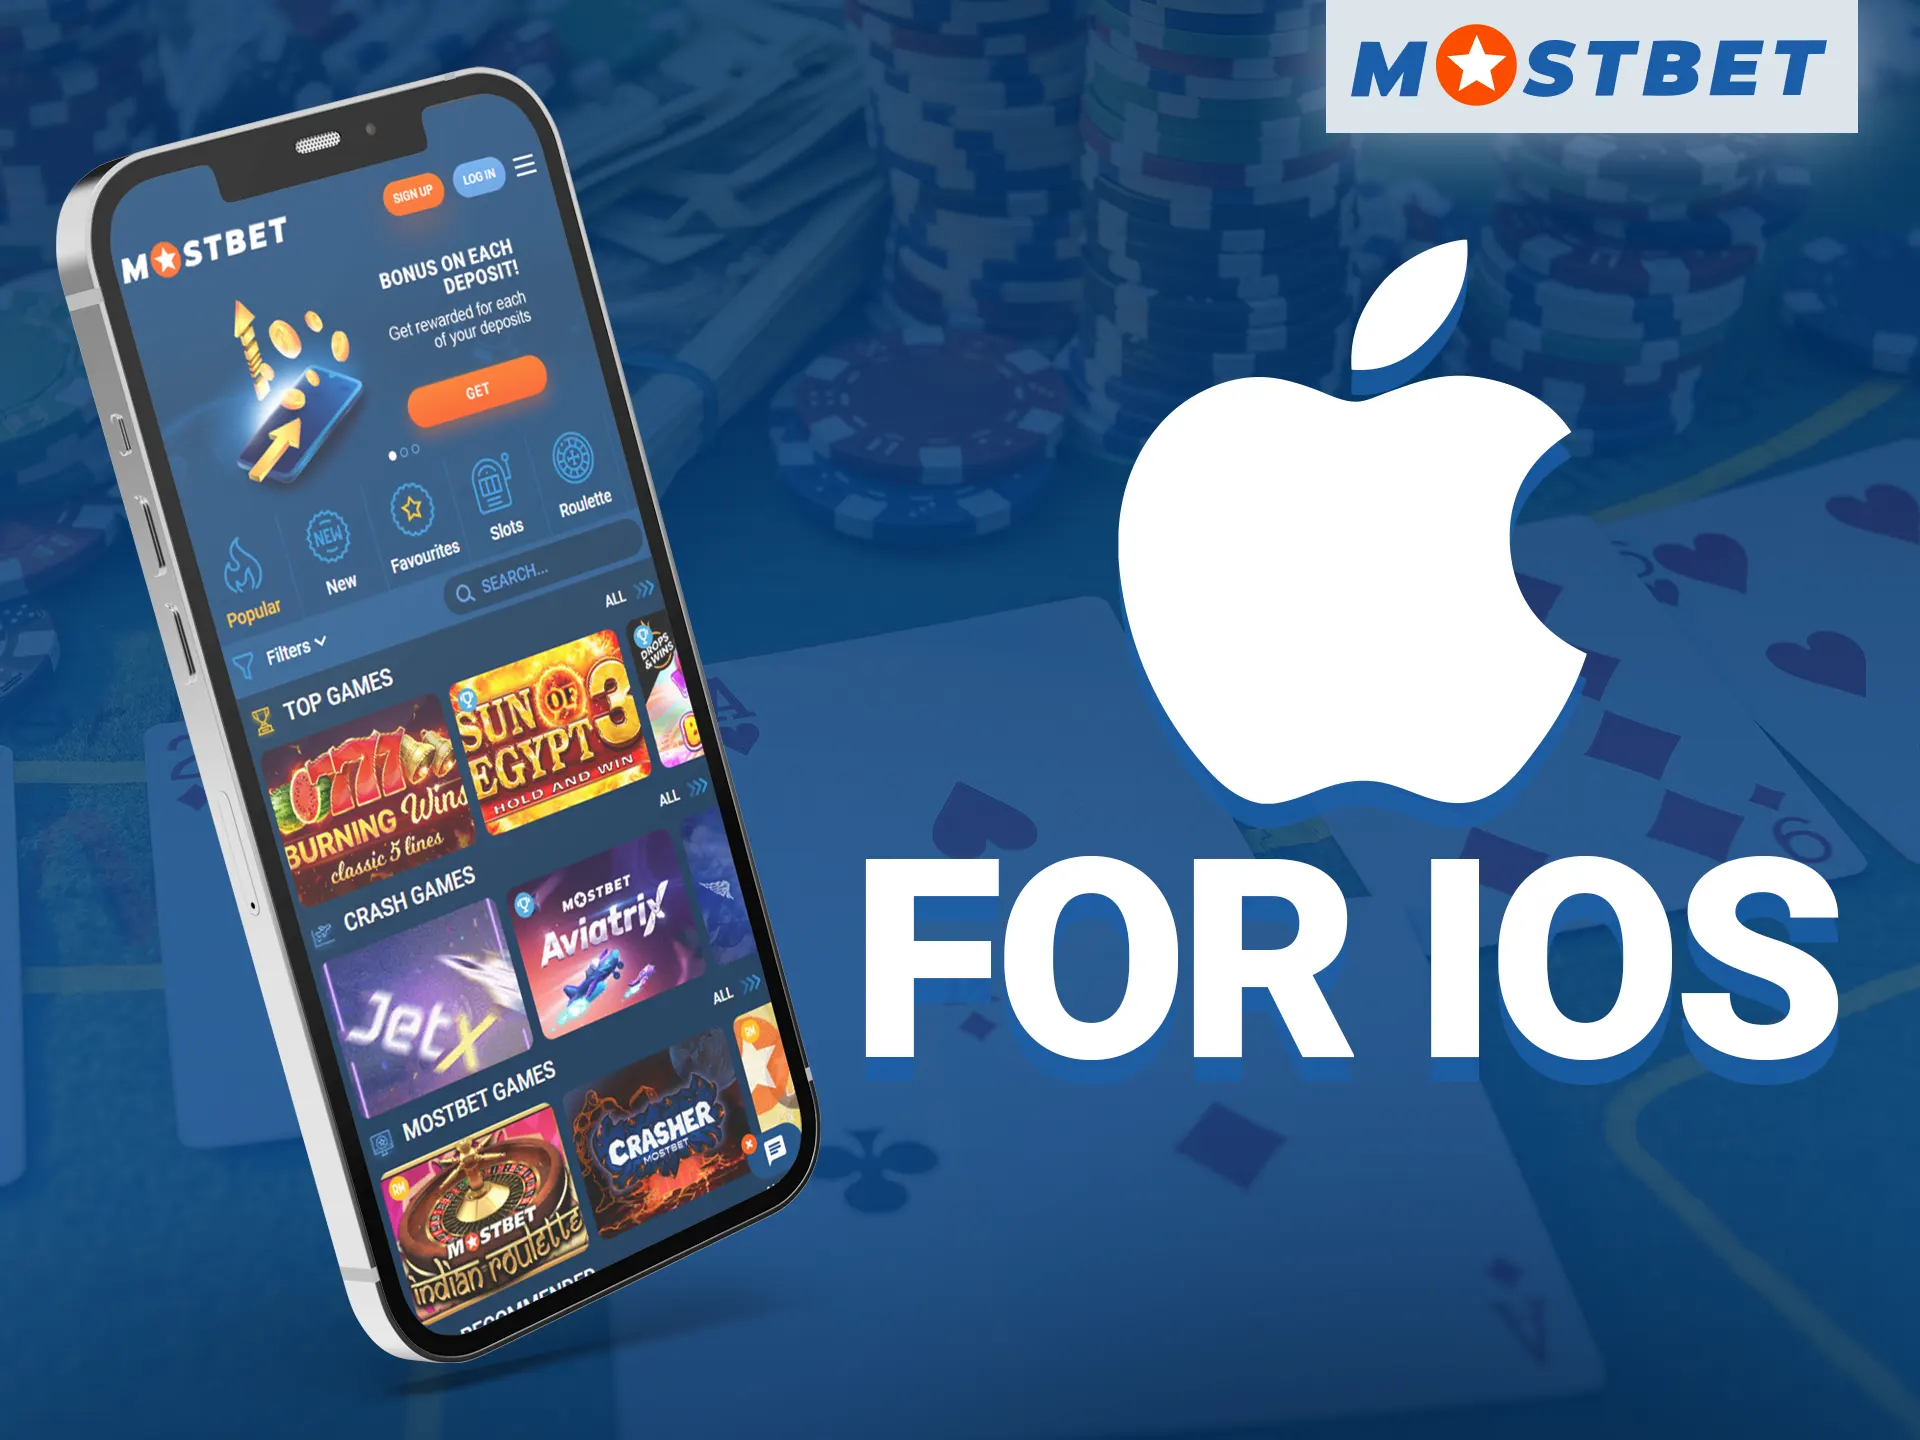 Install the Mostbet mobile app on your iOS device.